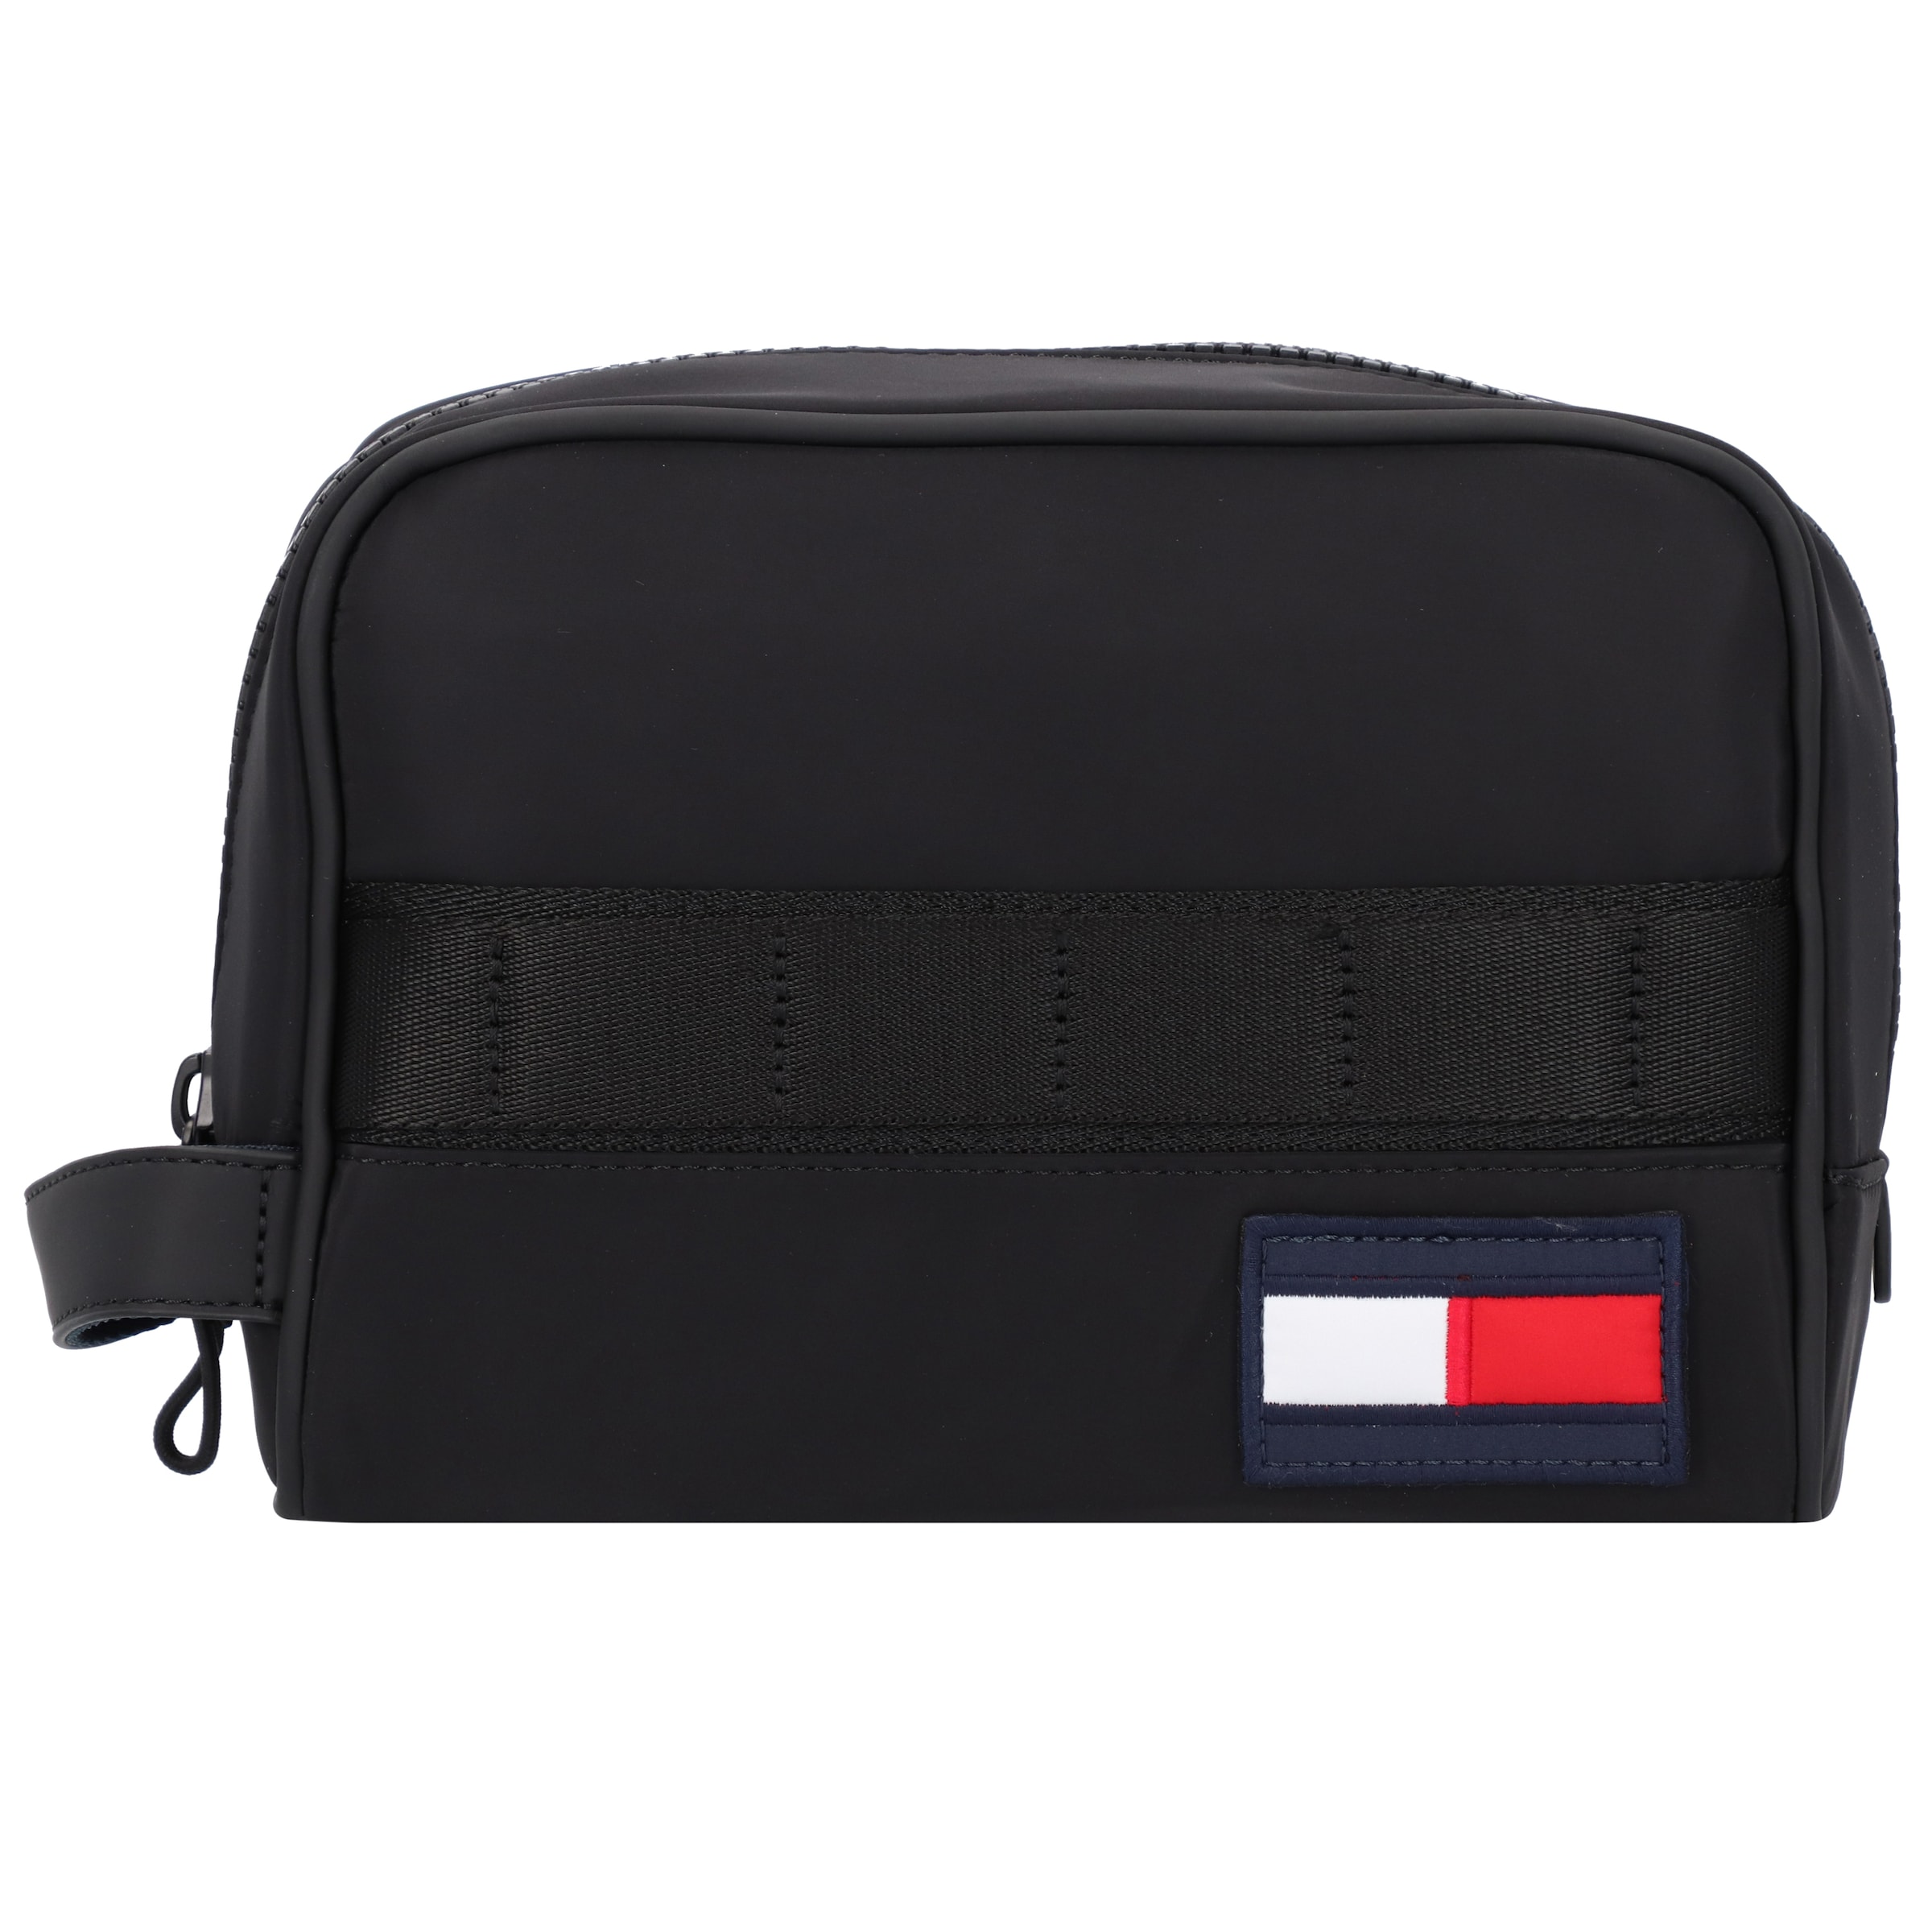 toiletry bag tommy hilfiger